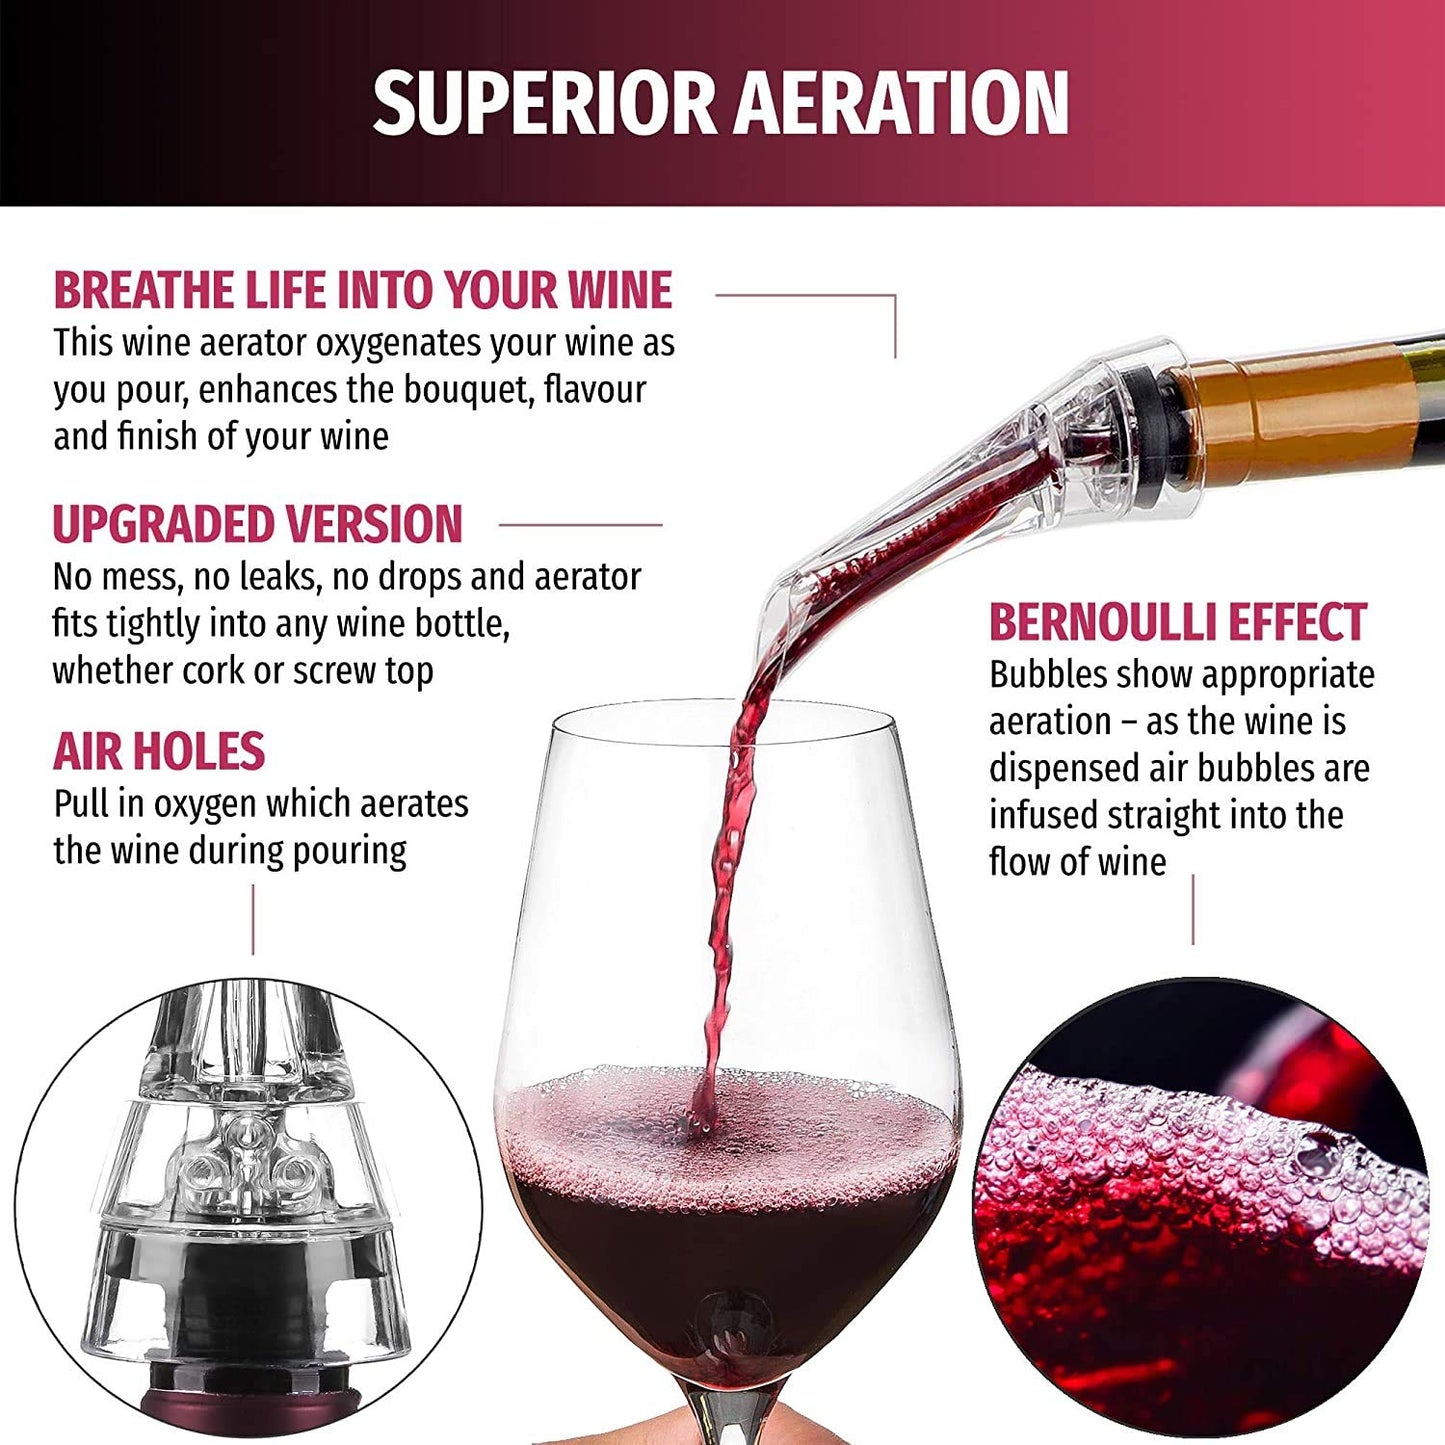 Abrazo Wine Aerator Pourer Spout - Professional Quality 2-in-1 Attaches to Any Wine Bottle for Improved Flavor, Enhanced Bouquet, Rich Finish and Bubbles, No-Drip or Spill - Abrazo